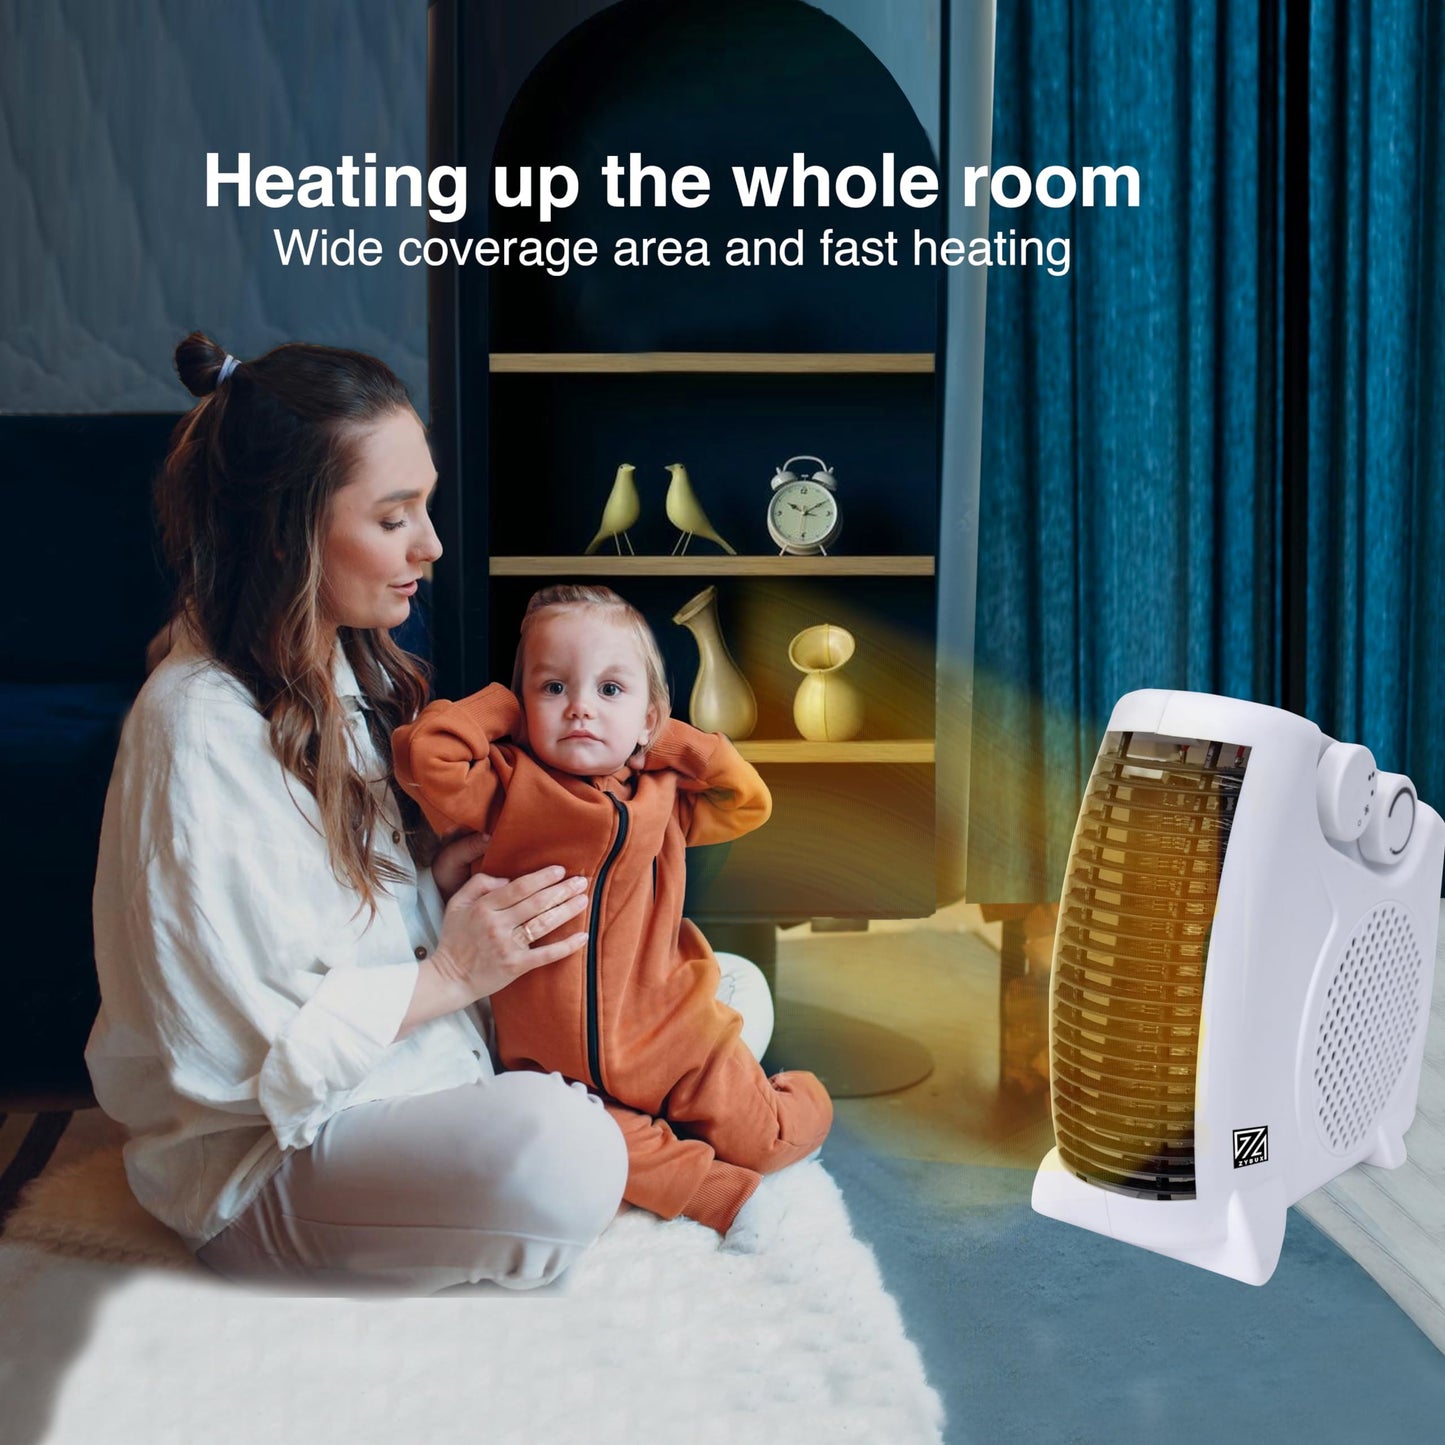 ZYBUX - 2000W Fan Heater with 2 Heat settings & Cool Function – Upright Electric Quiet Space Heater for Home with Variable Thermostat | Perfect Electric Room Heater (UPRIGHT FAN HEATER)